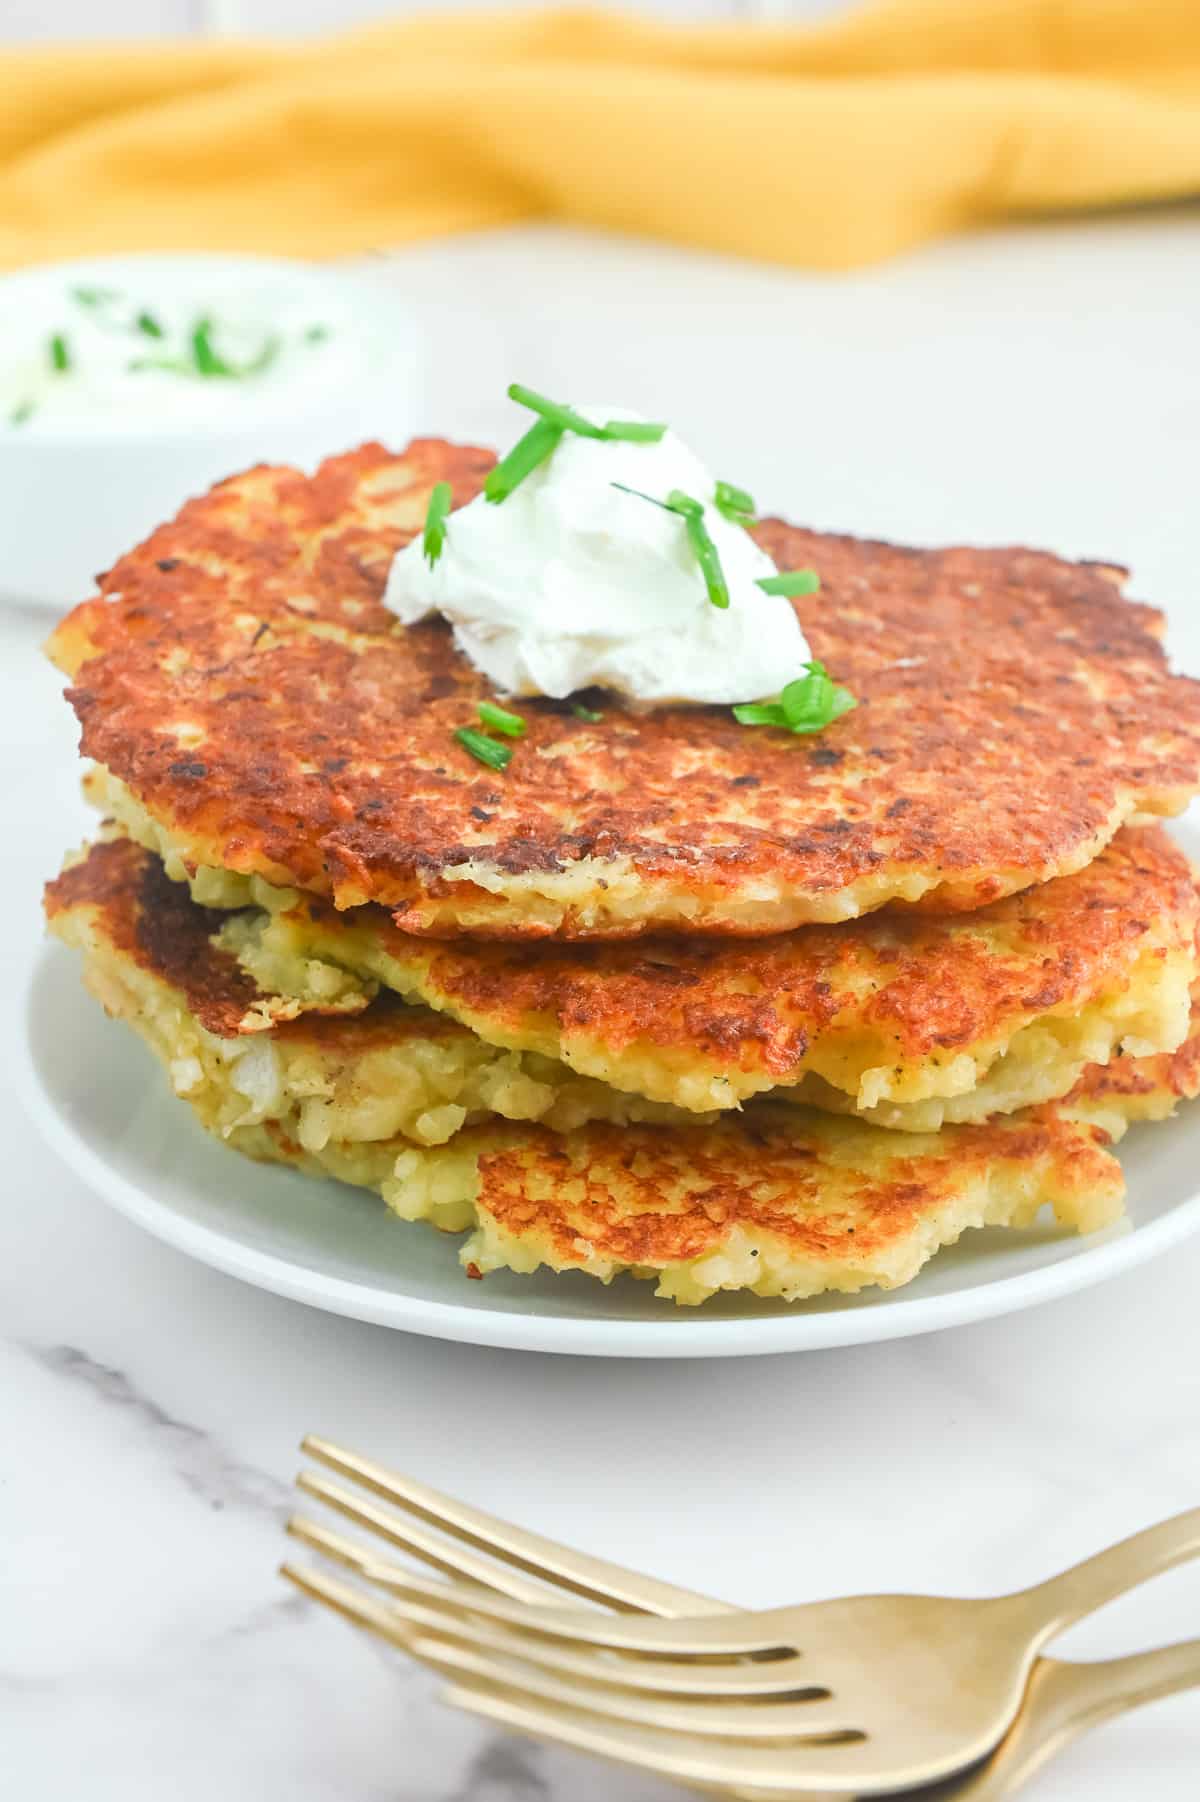 A stack of potato pancakes on a plate with sour cream and chives.